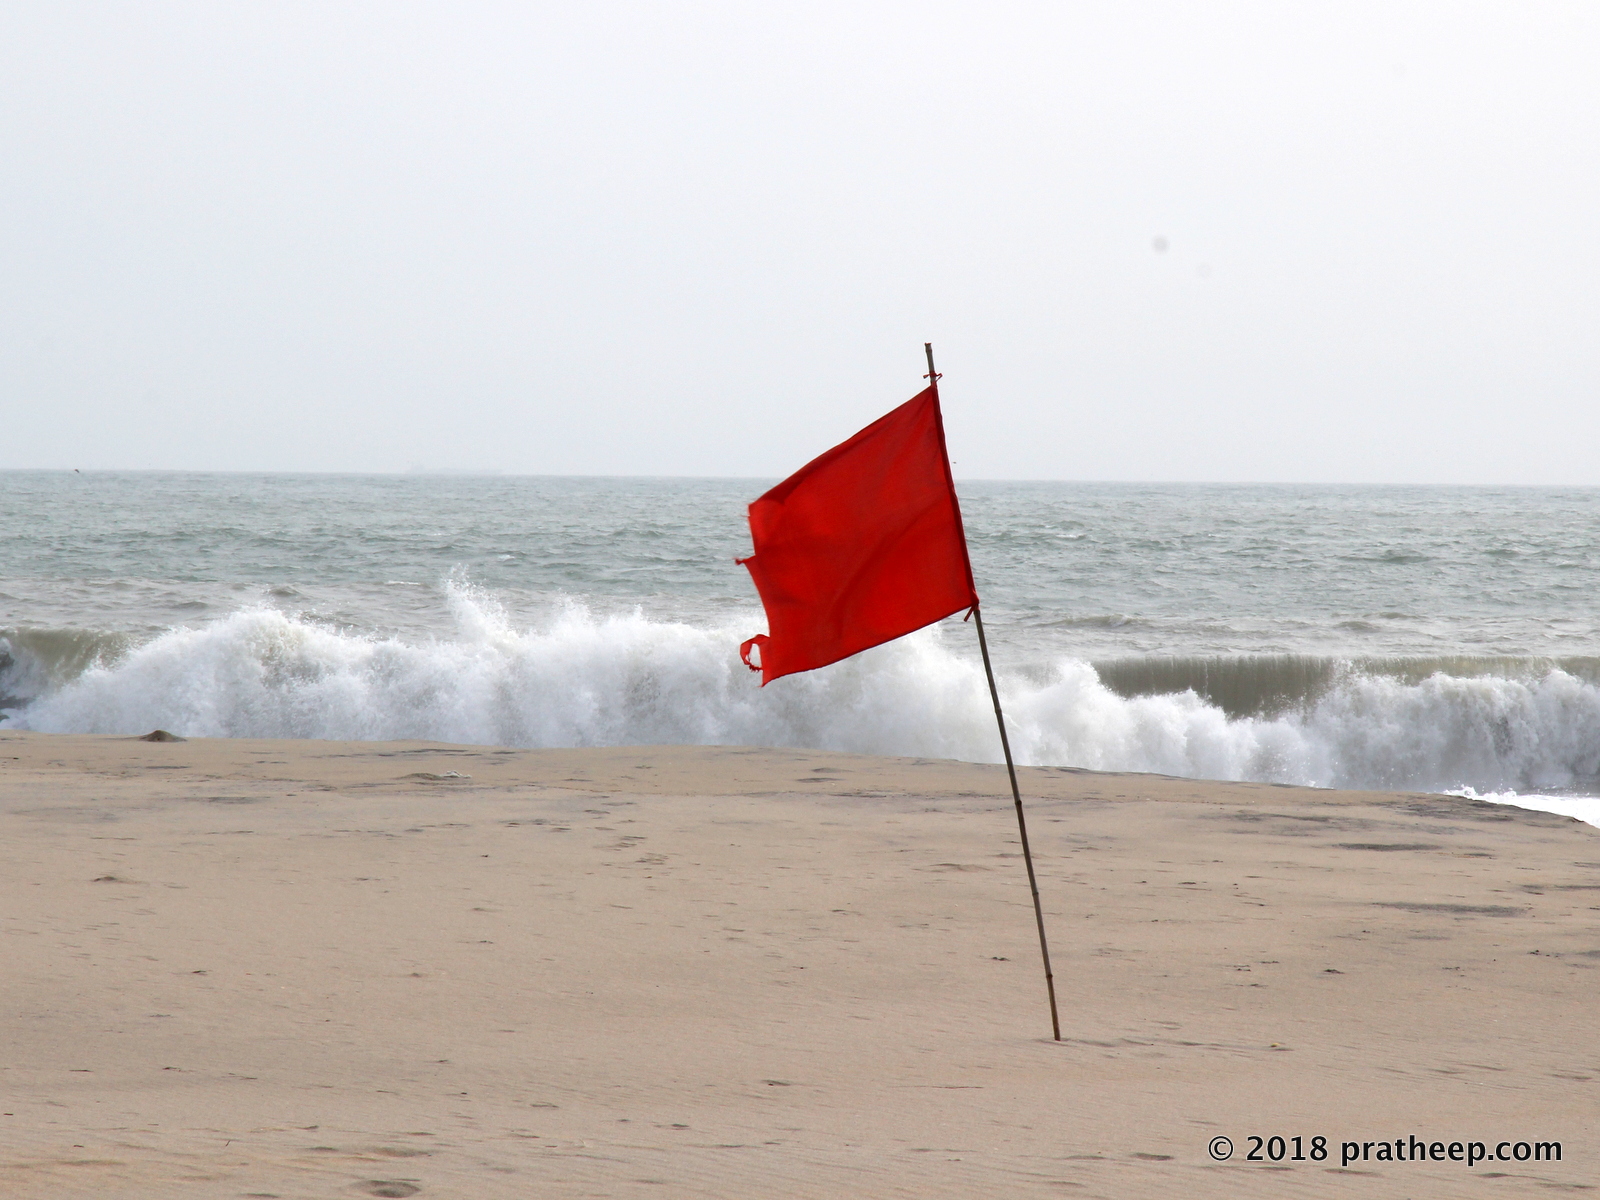 The most serious of all beach warning flags, red flags warn swimmers of severe hazards in the water. Keep away from the water.